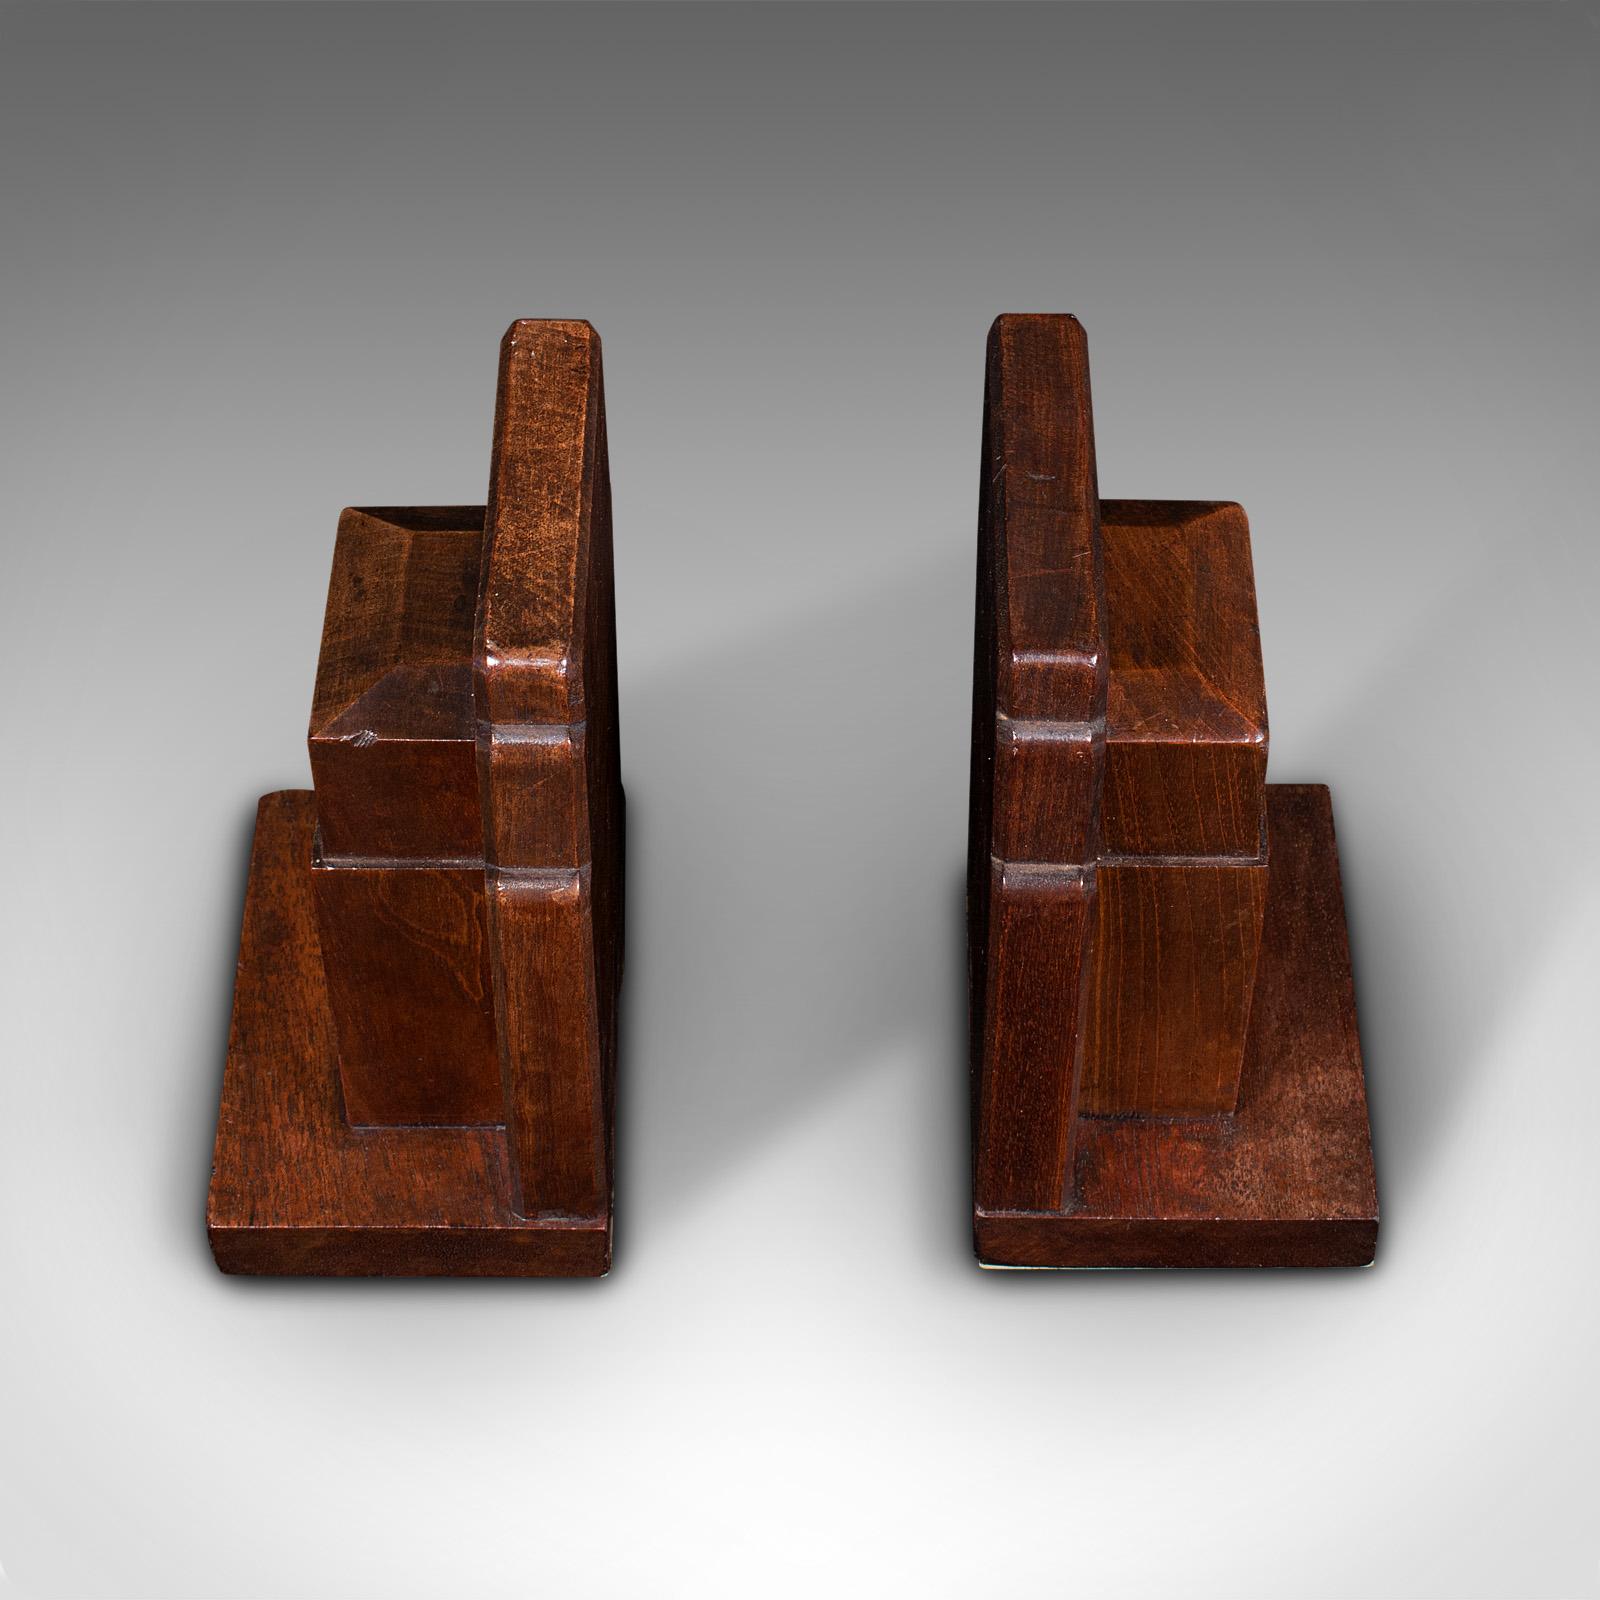 Vintage Pair of Decorative Bookends, English, Walnut, Gordon Russell, Circa 1930 For Sale 1